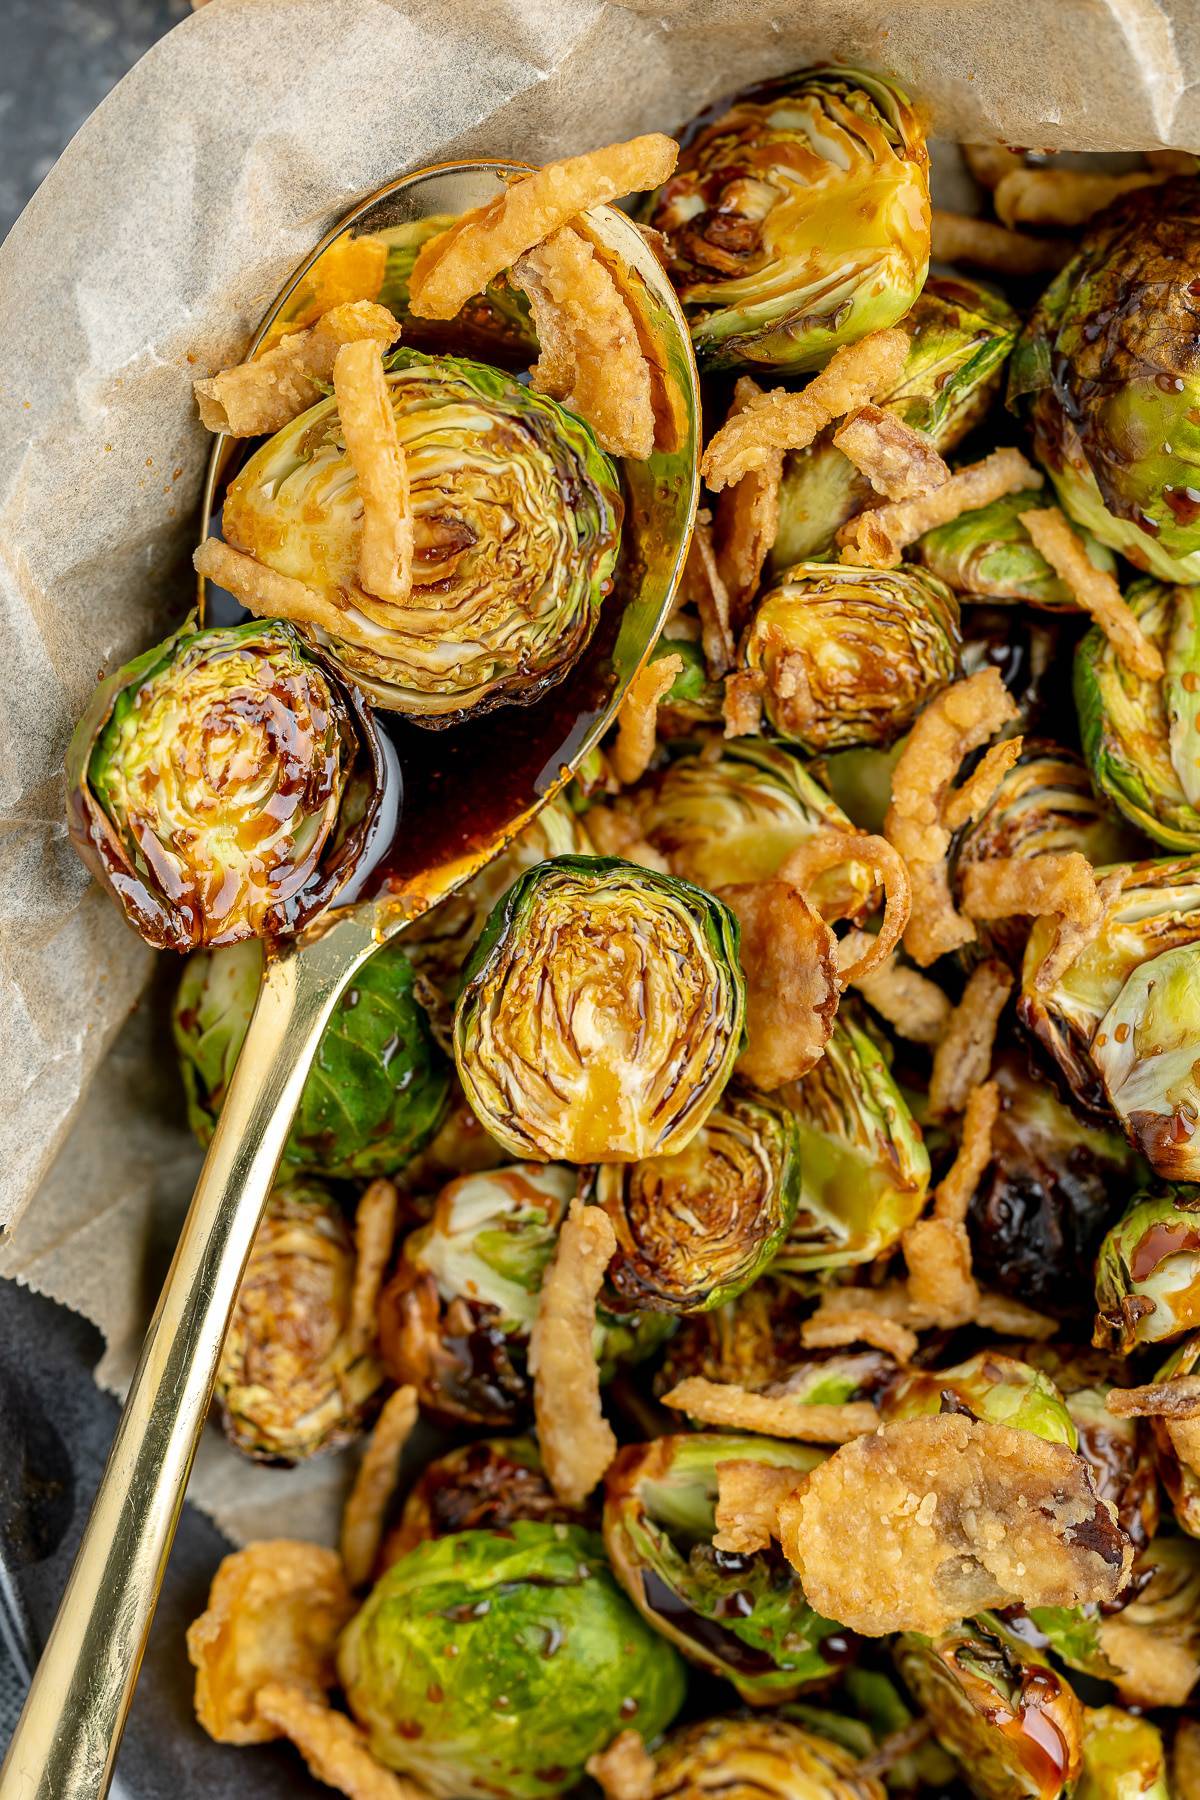 Red lobster brussel sprouts with soy glaze on a spoon.